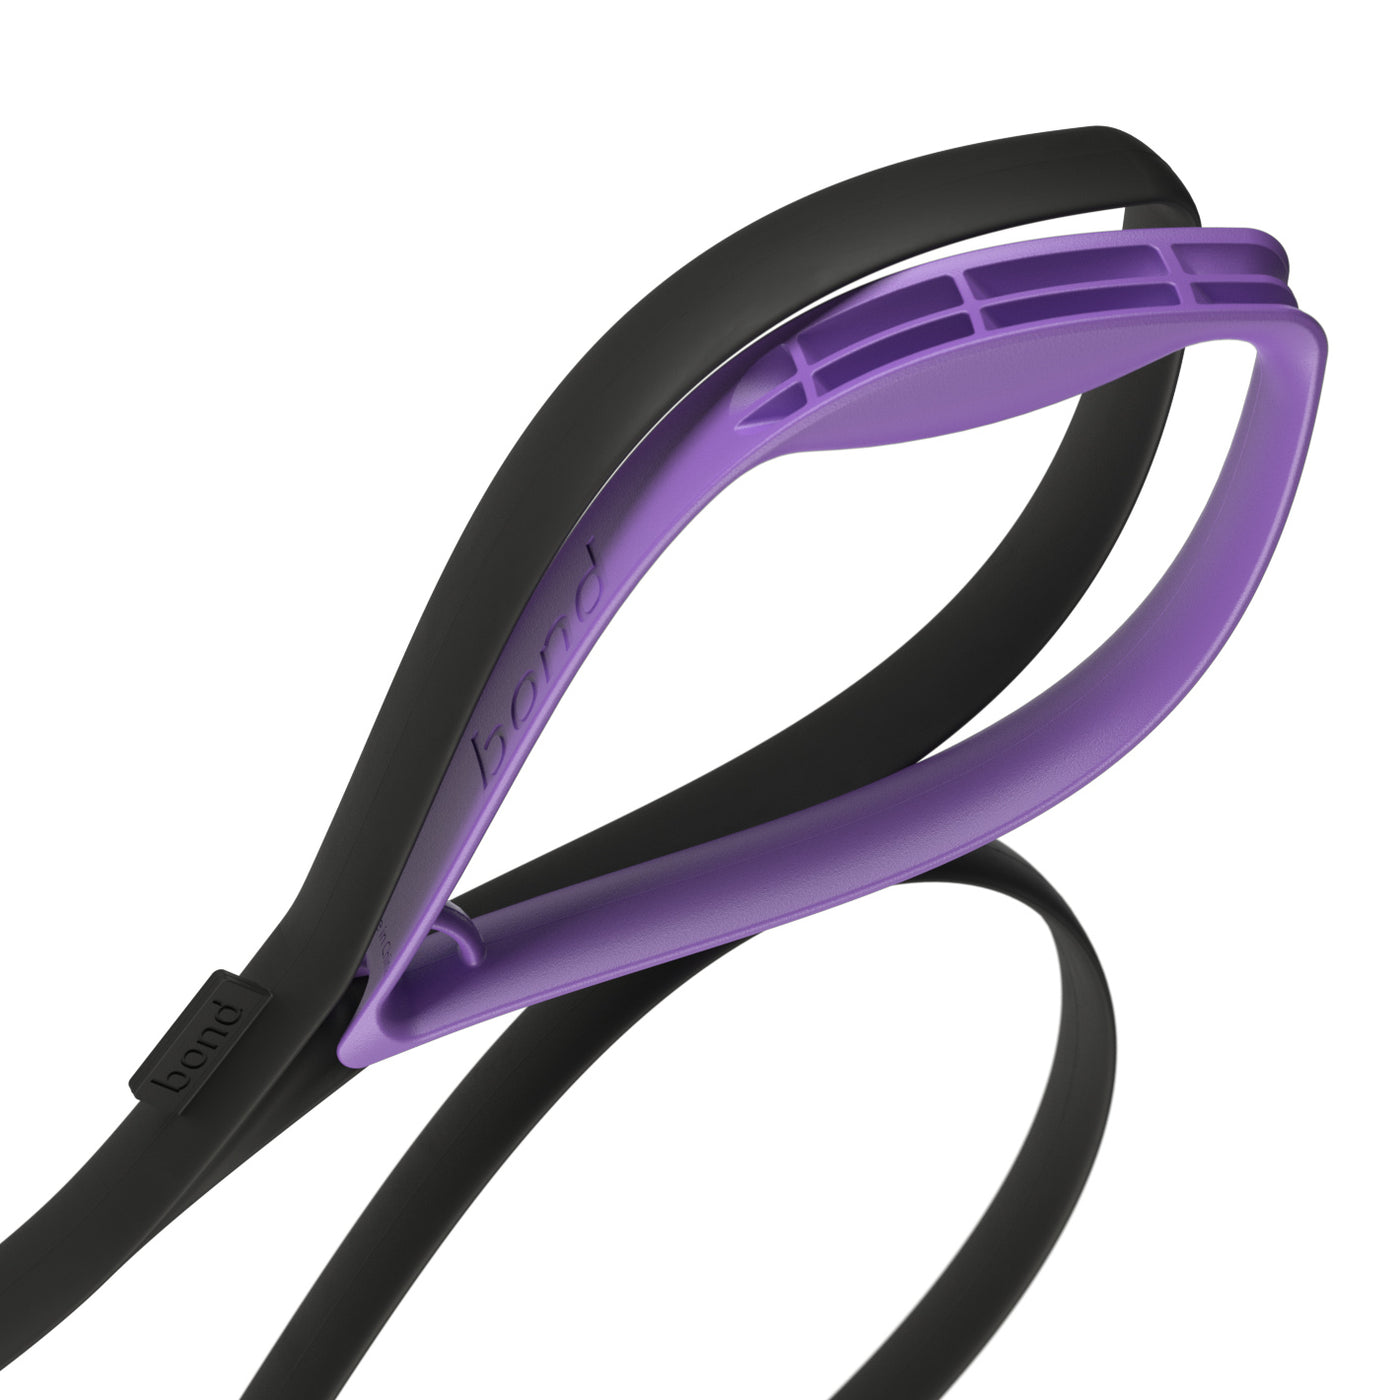 Purple ergonomic grip being attached to dog leash